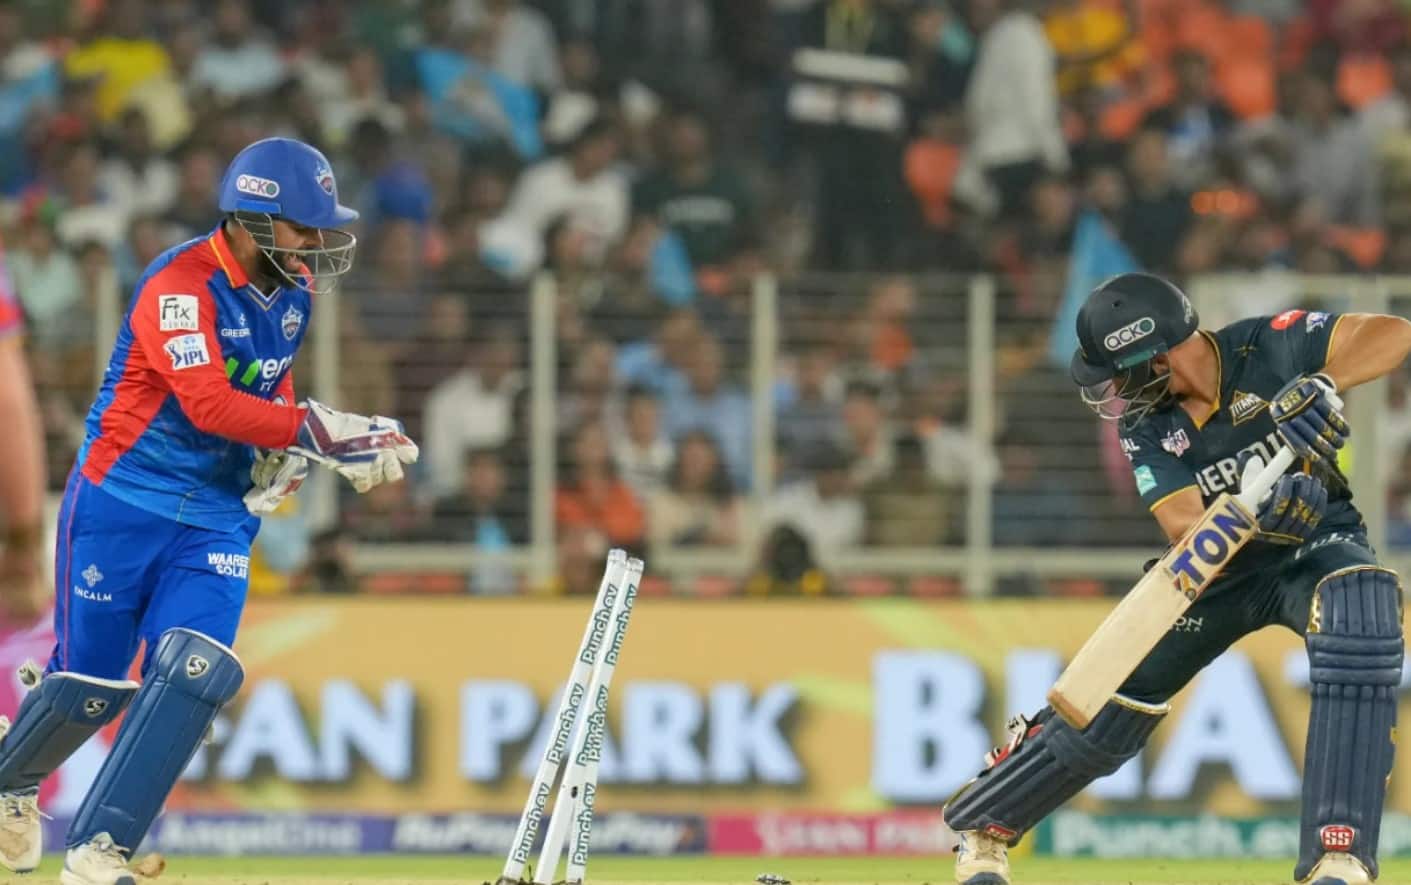 Rishabh Pant claimed two catches and two stumpings against Gujarat Titans (BCCI)